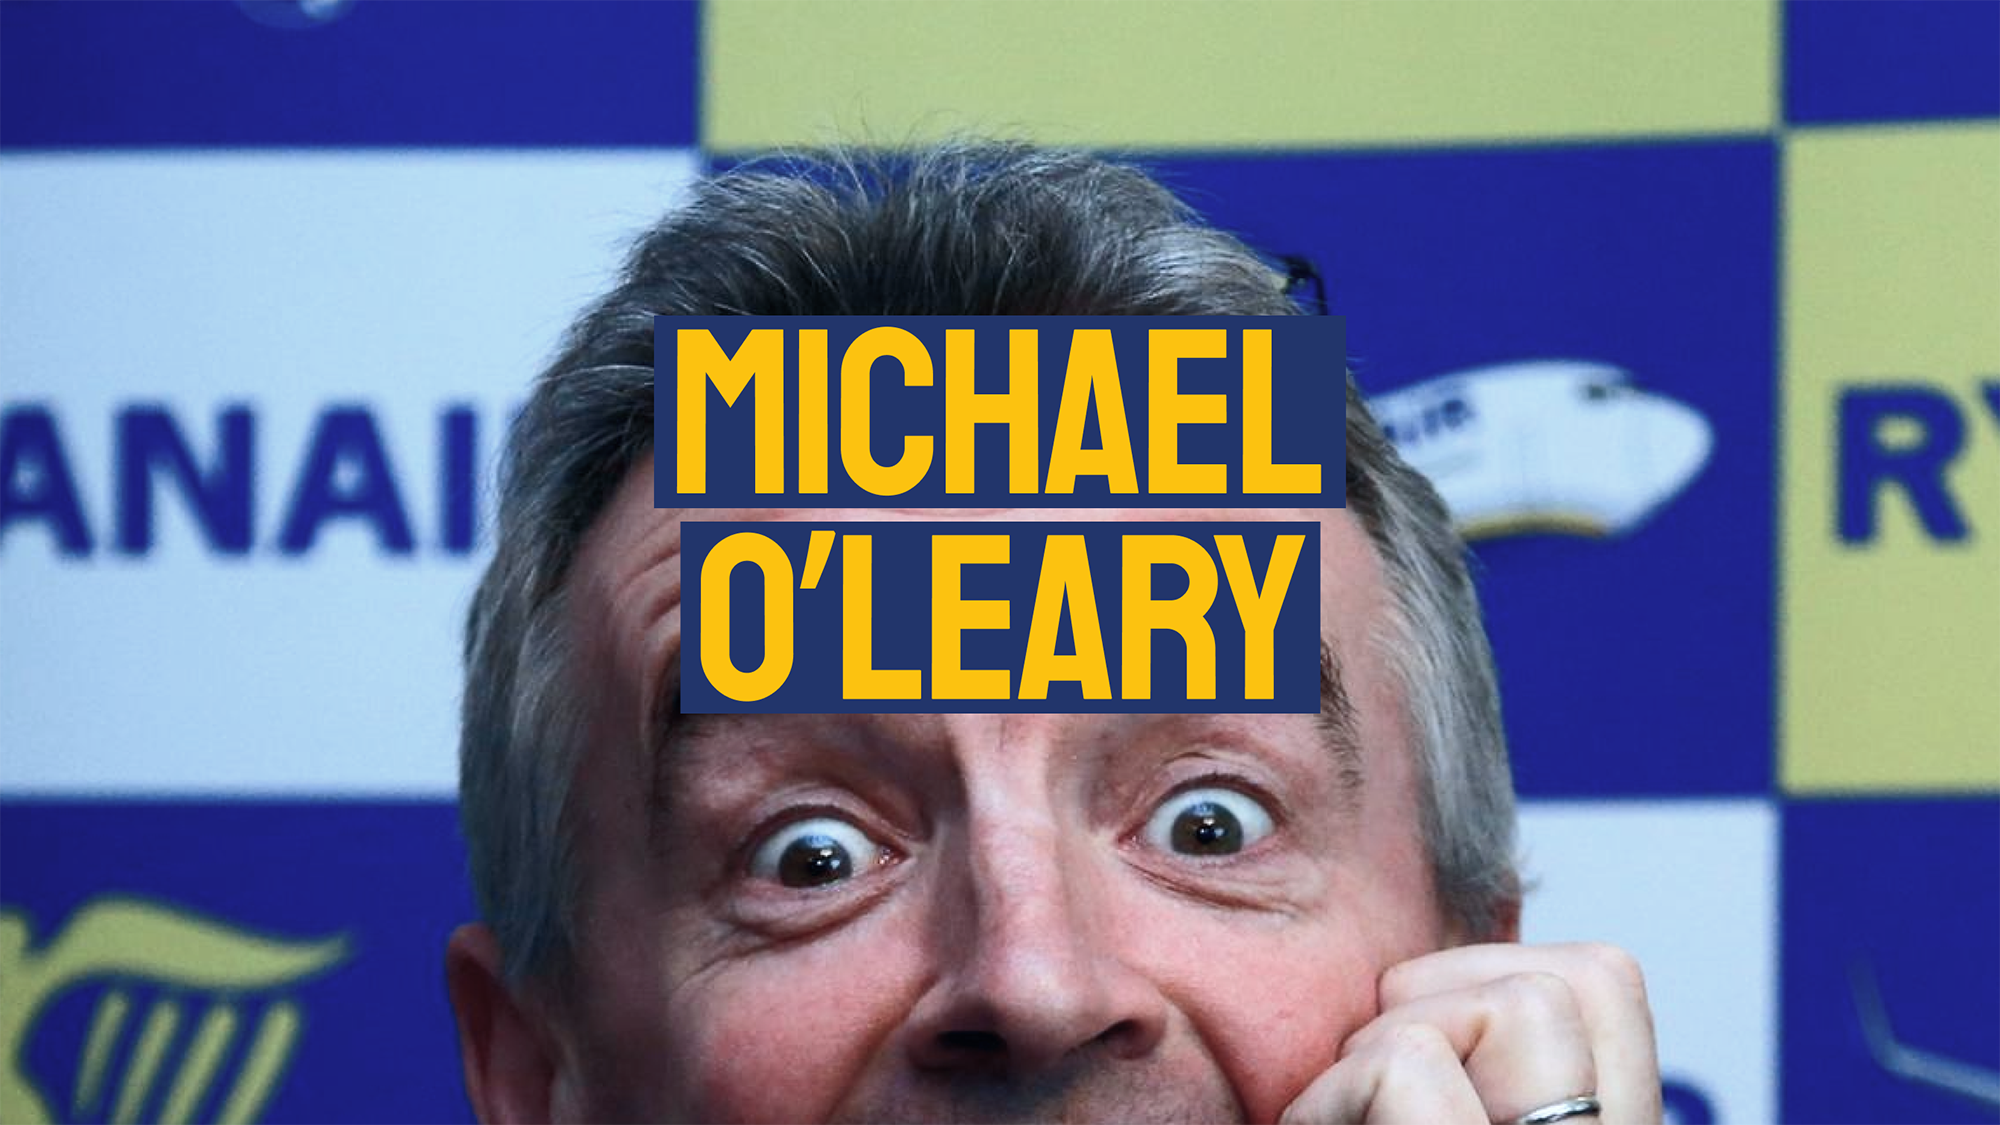 Explore Michael O'Leary's remarkable transformation with Ryanair